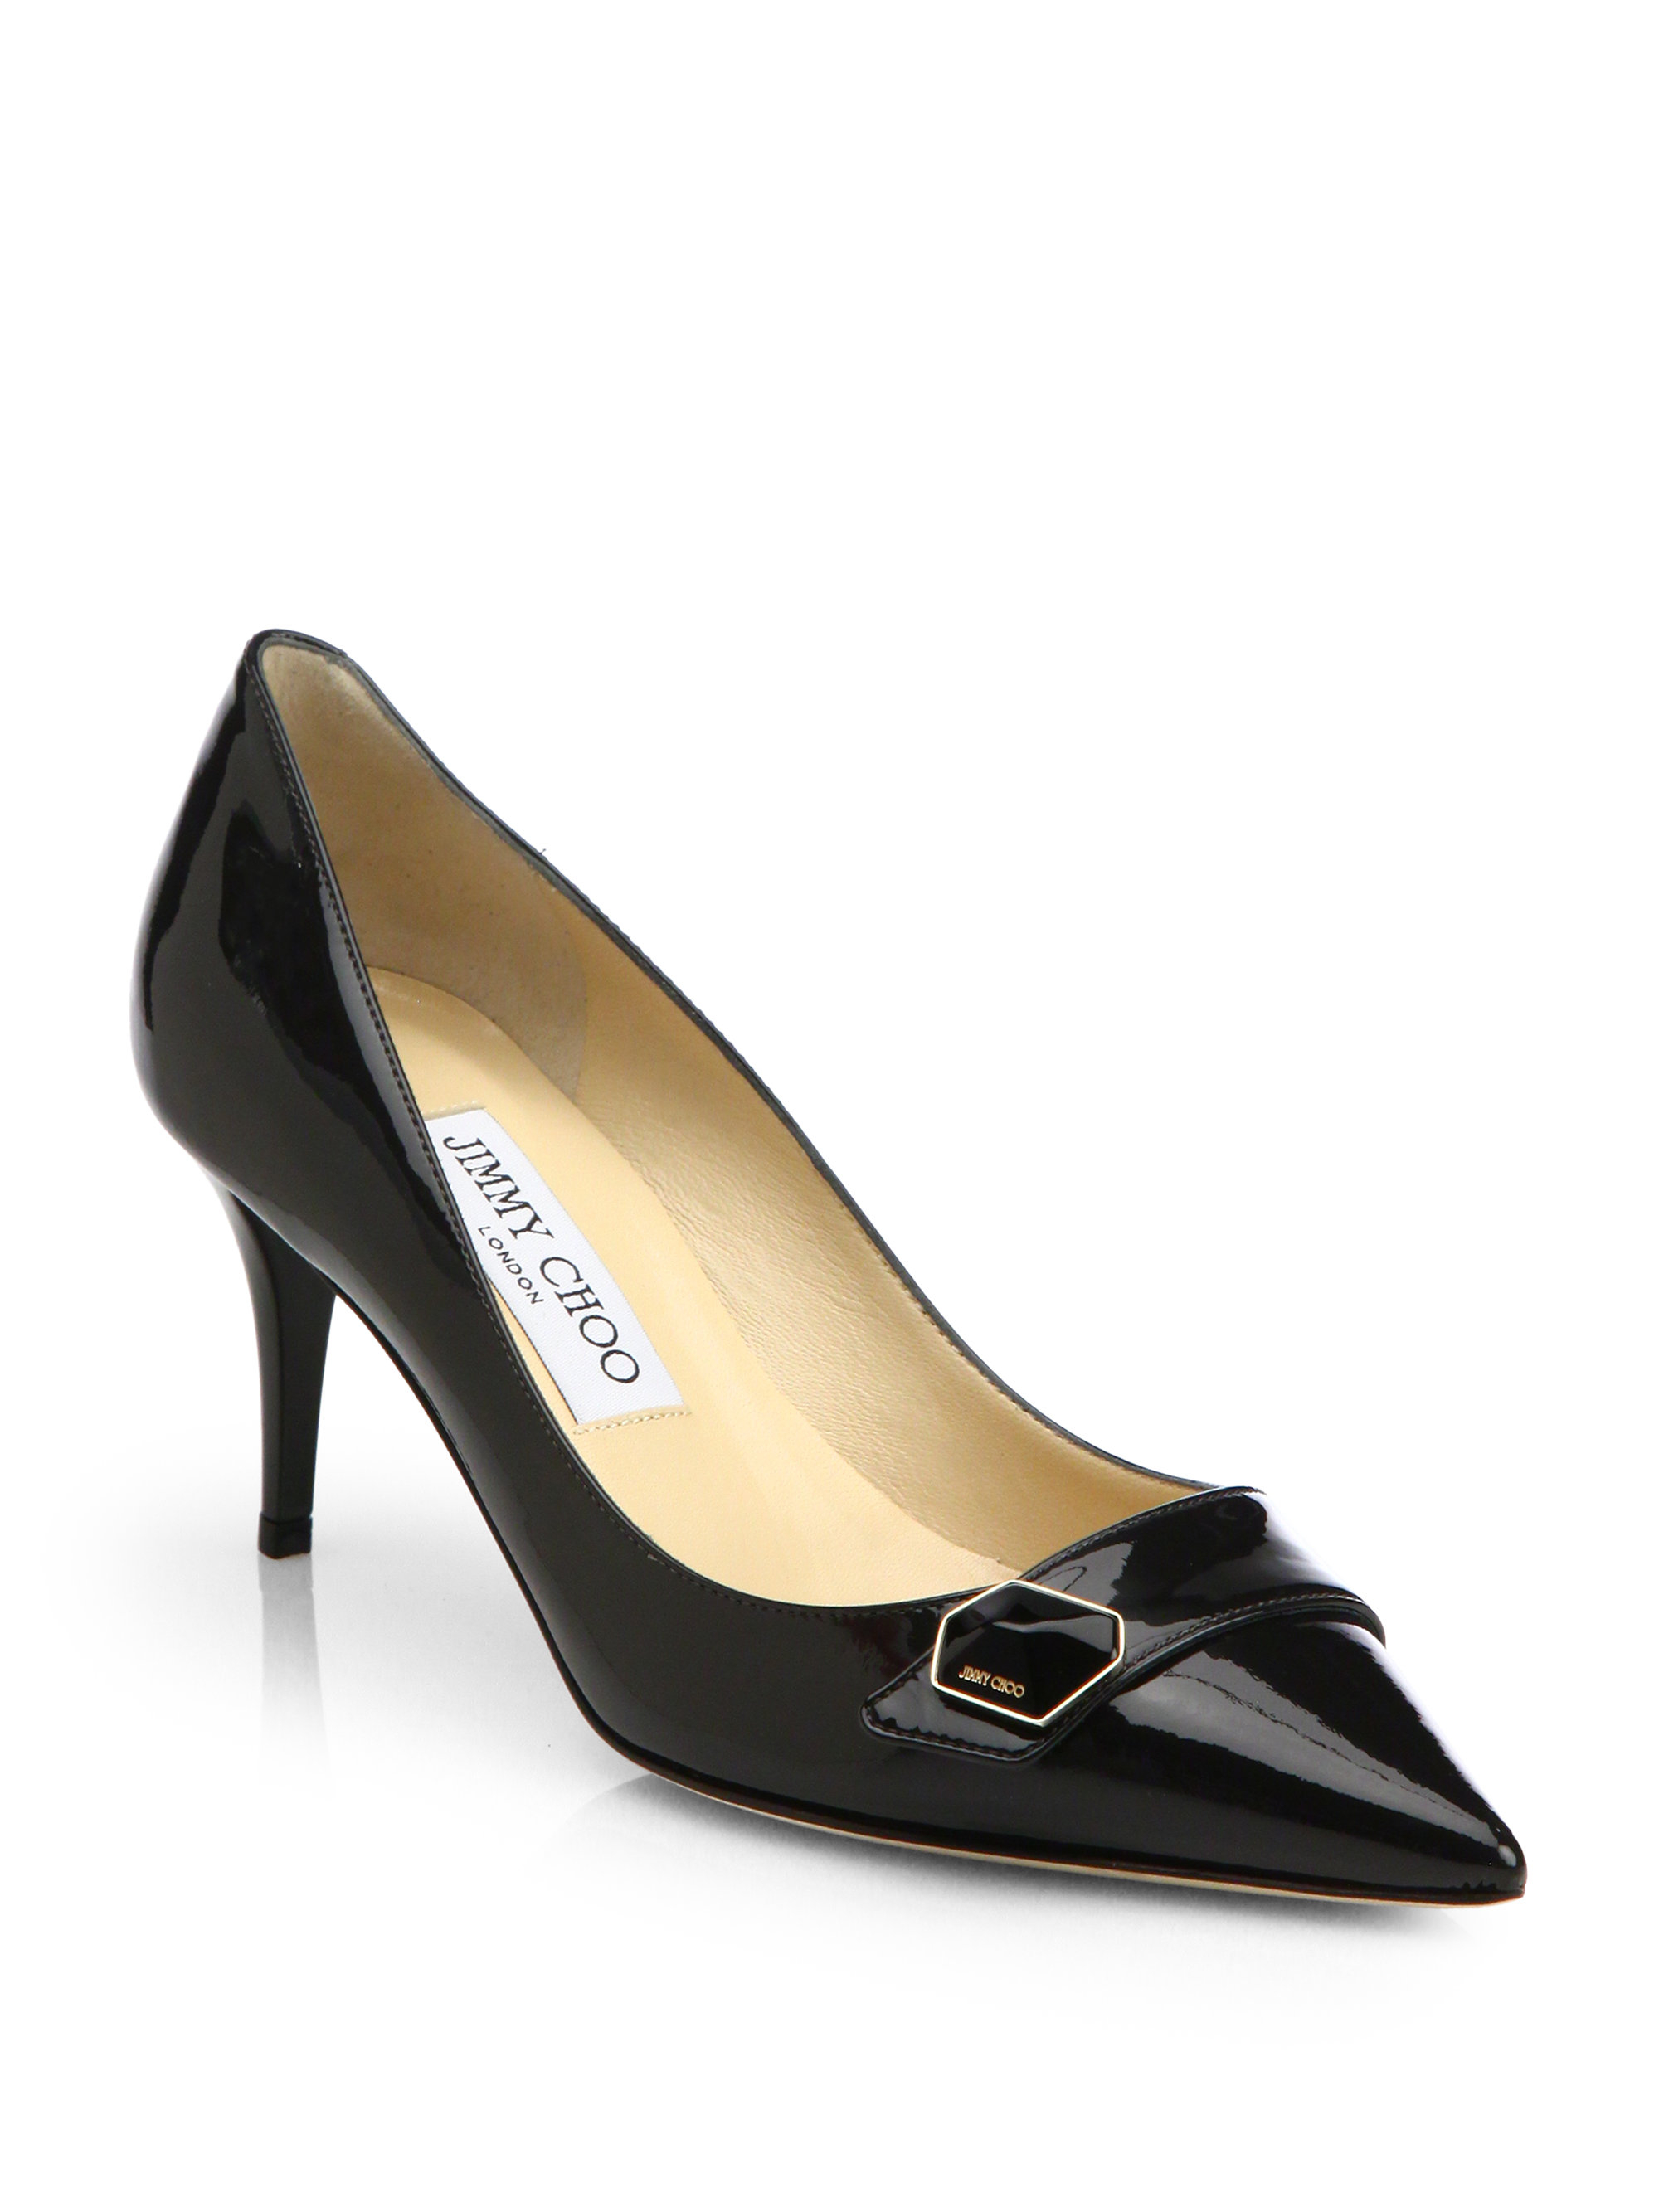 Jimmy Choo Hyder Patent Leather Pumps in Black - Lyst